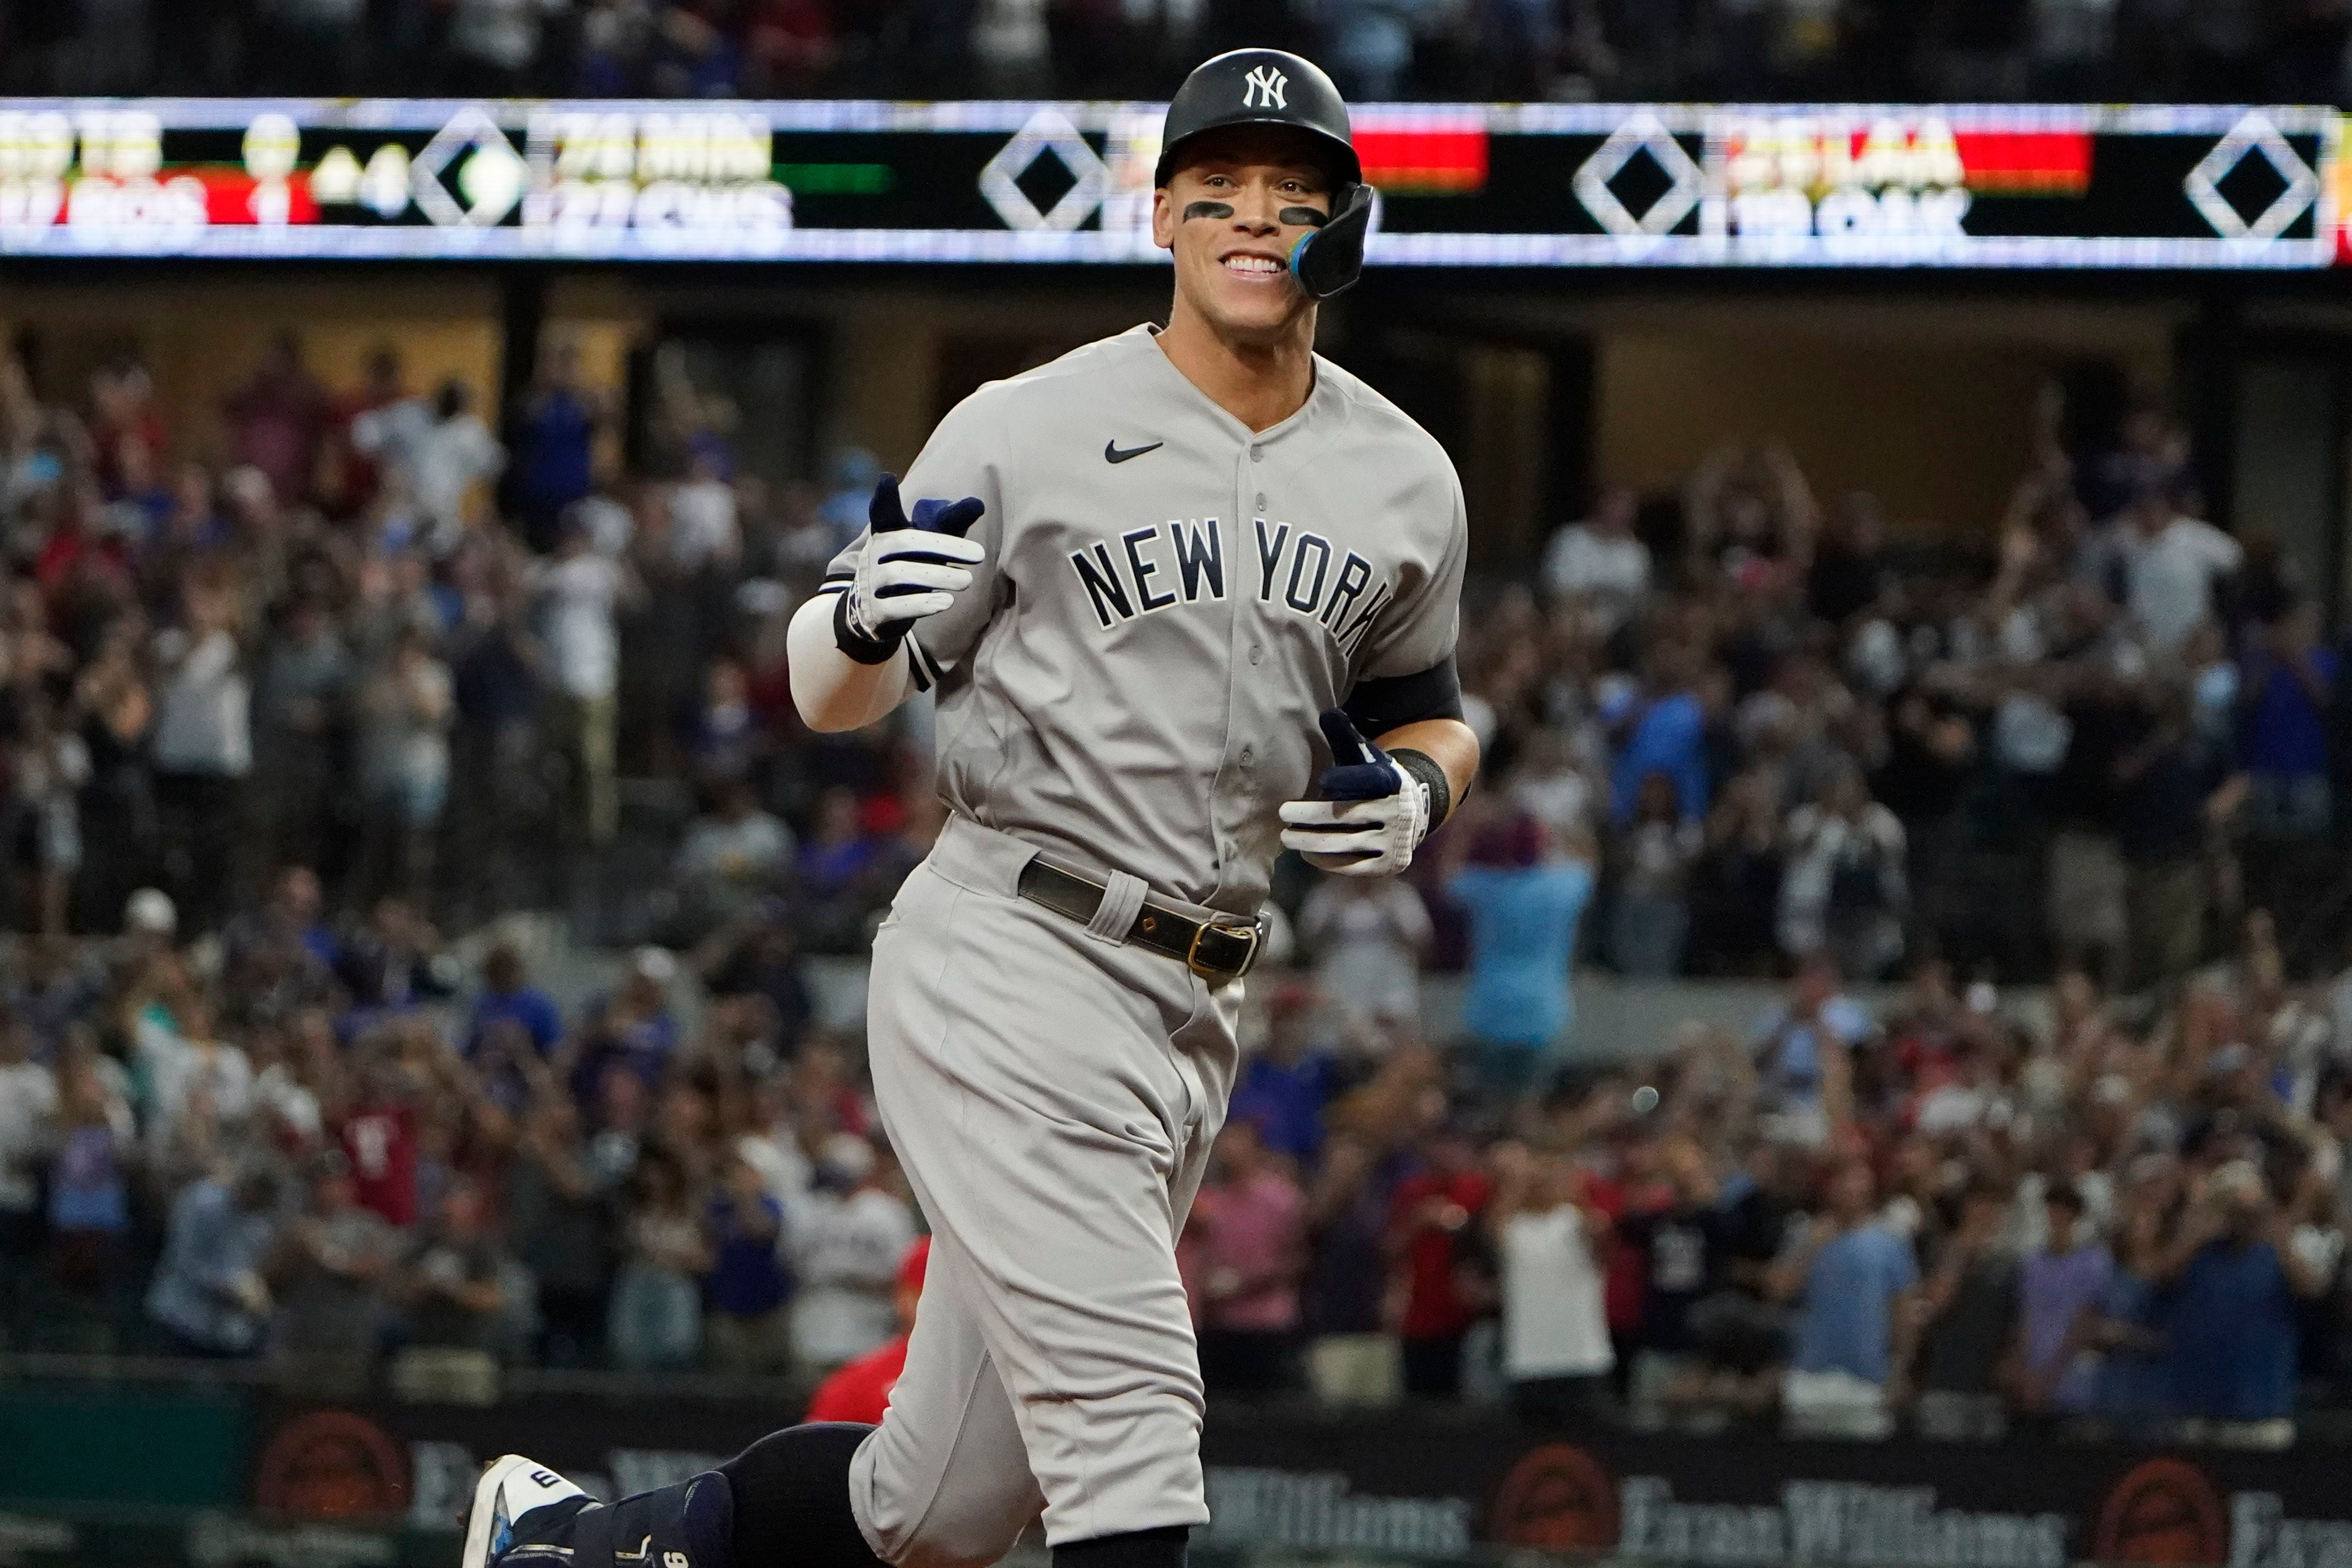 Aaron Judge and Albert Pujols are closing in on major home run